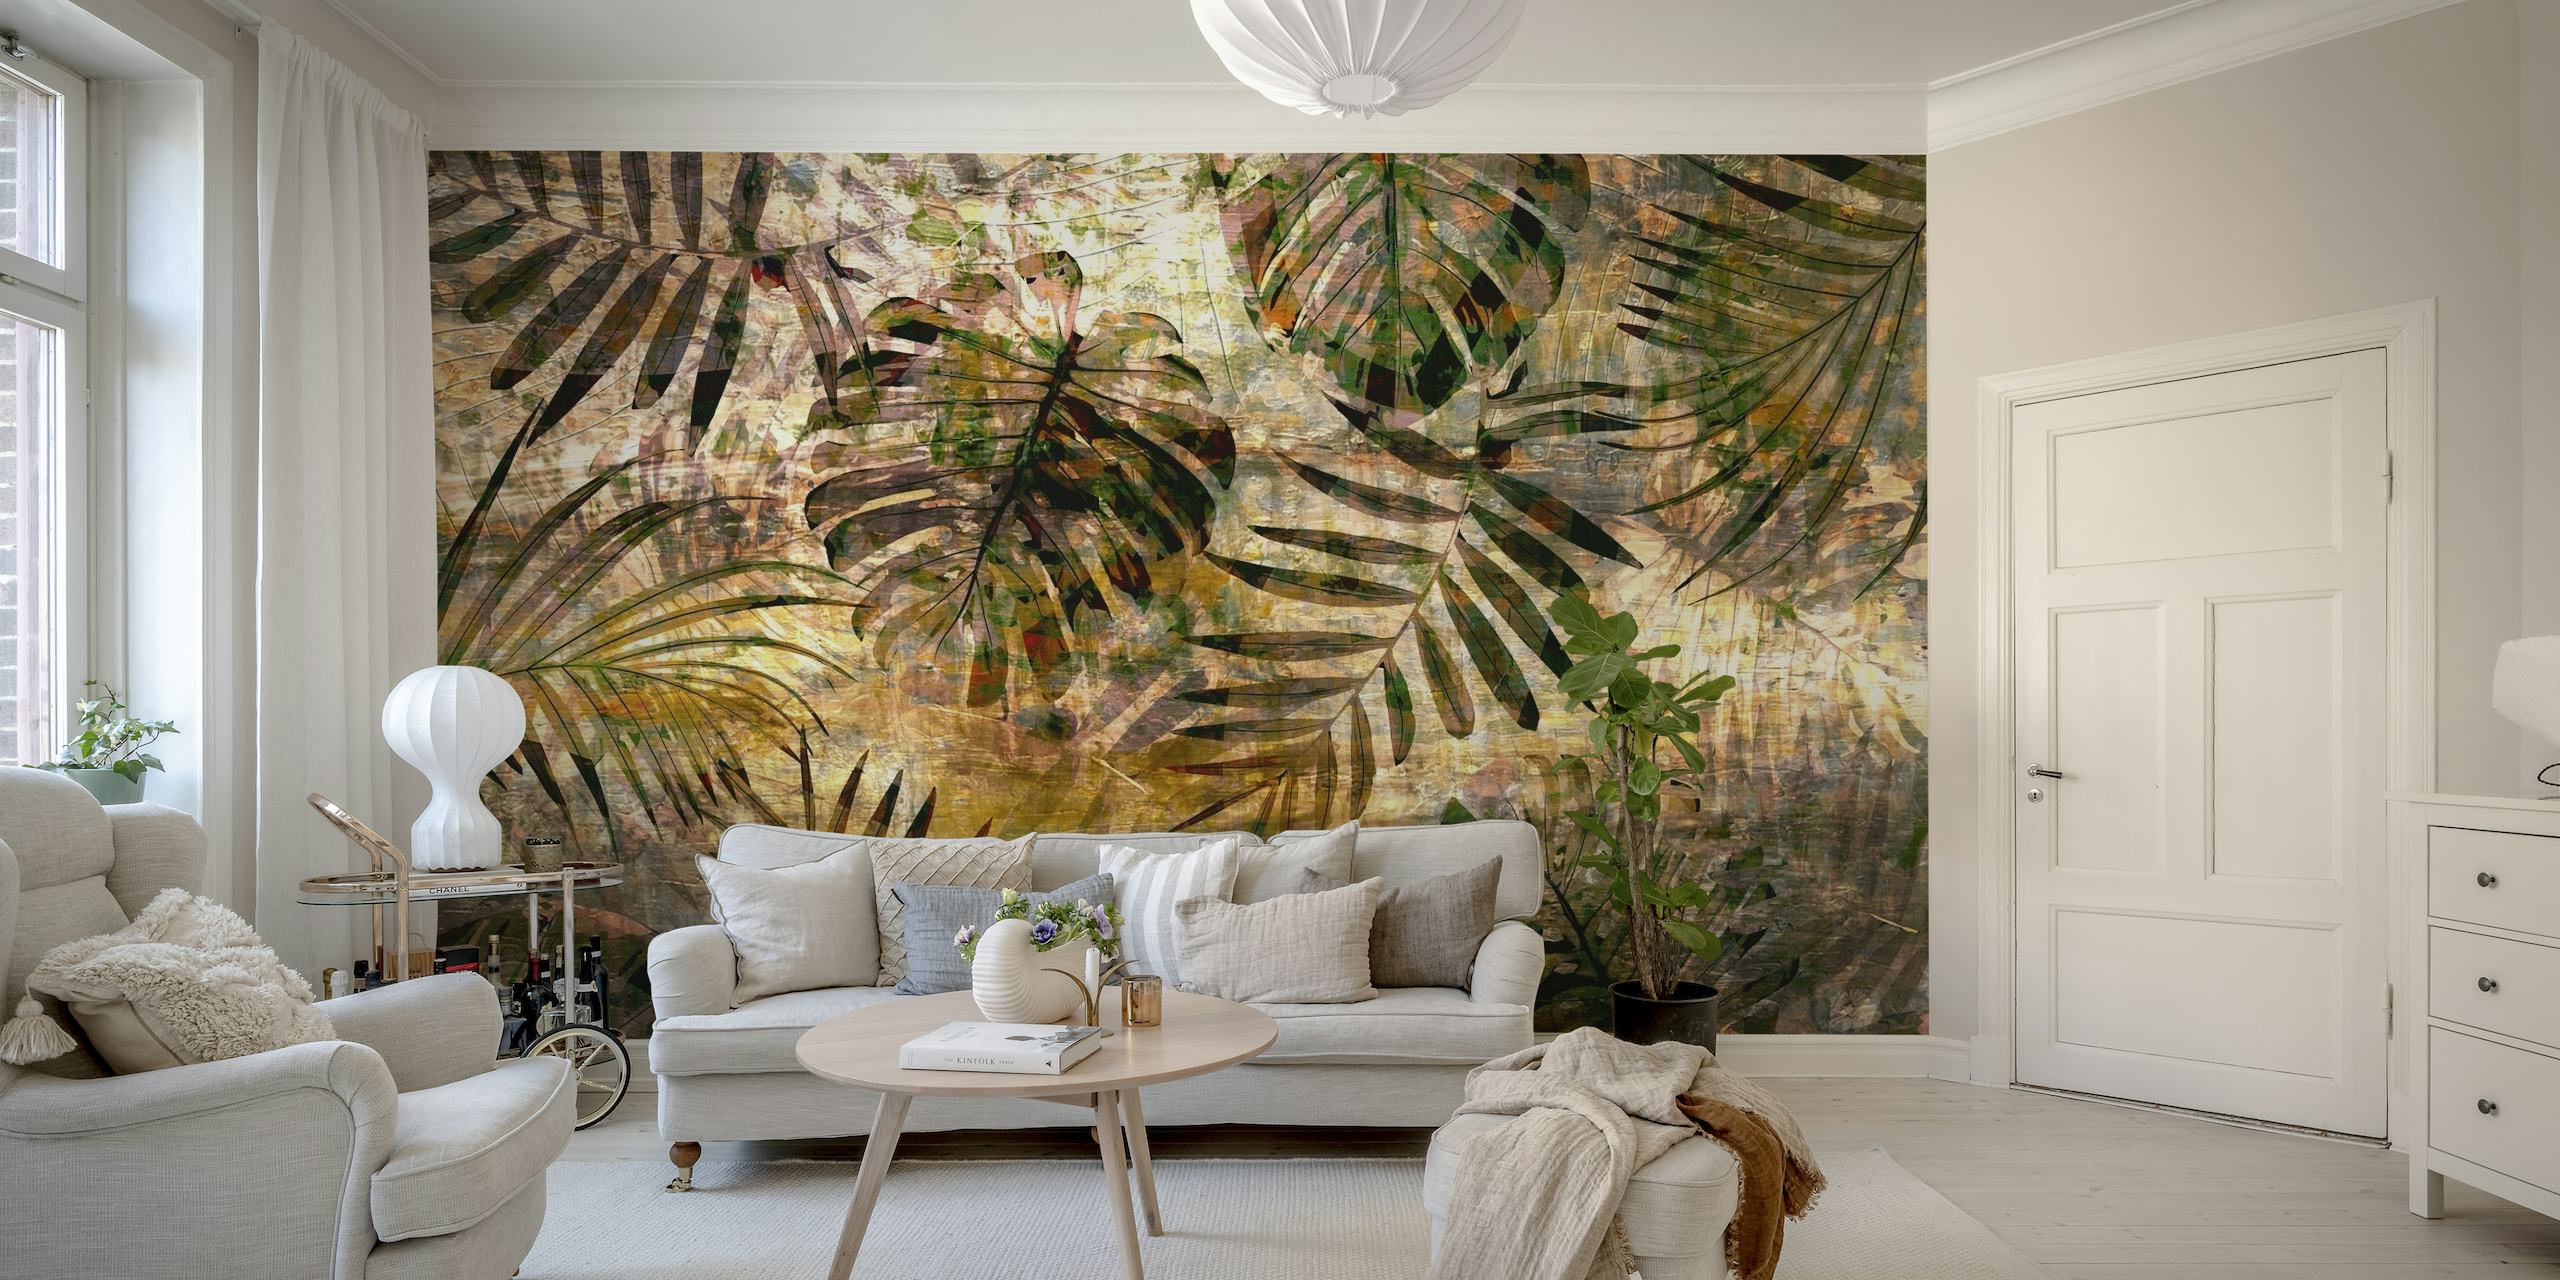 Mystic Jungle wall mural in earthy tones with dense foliage